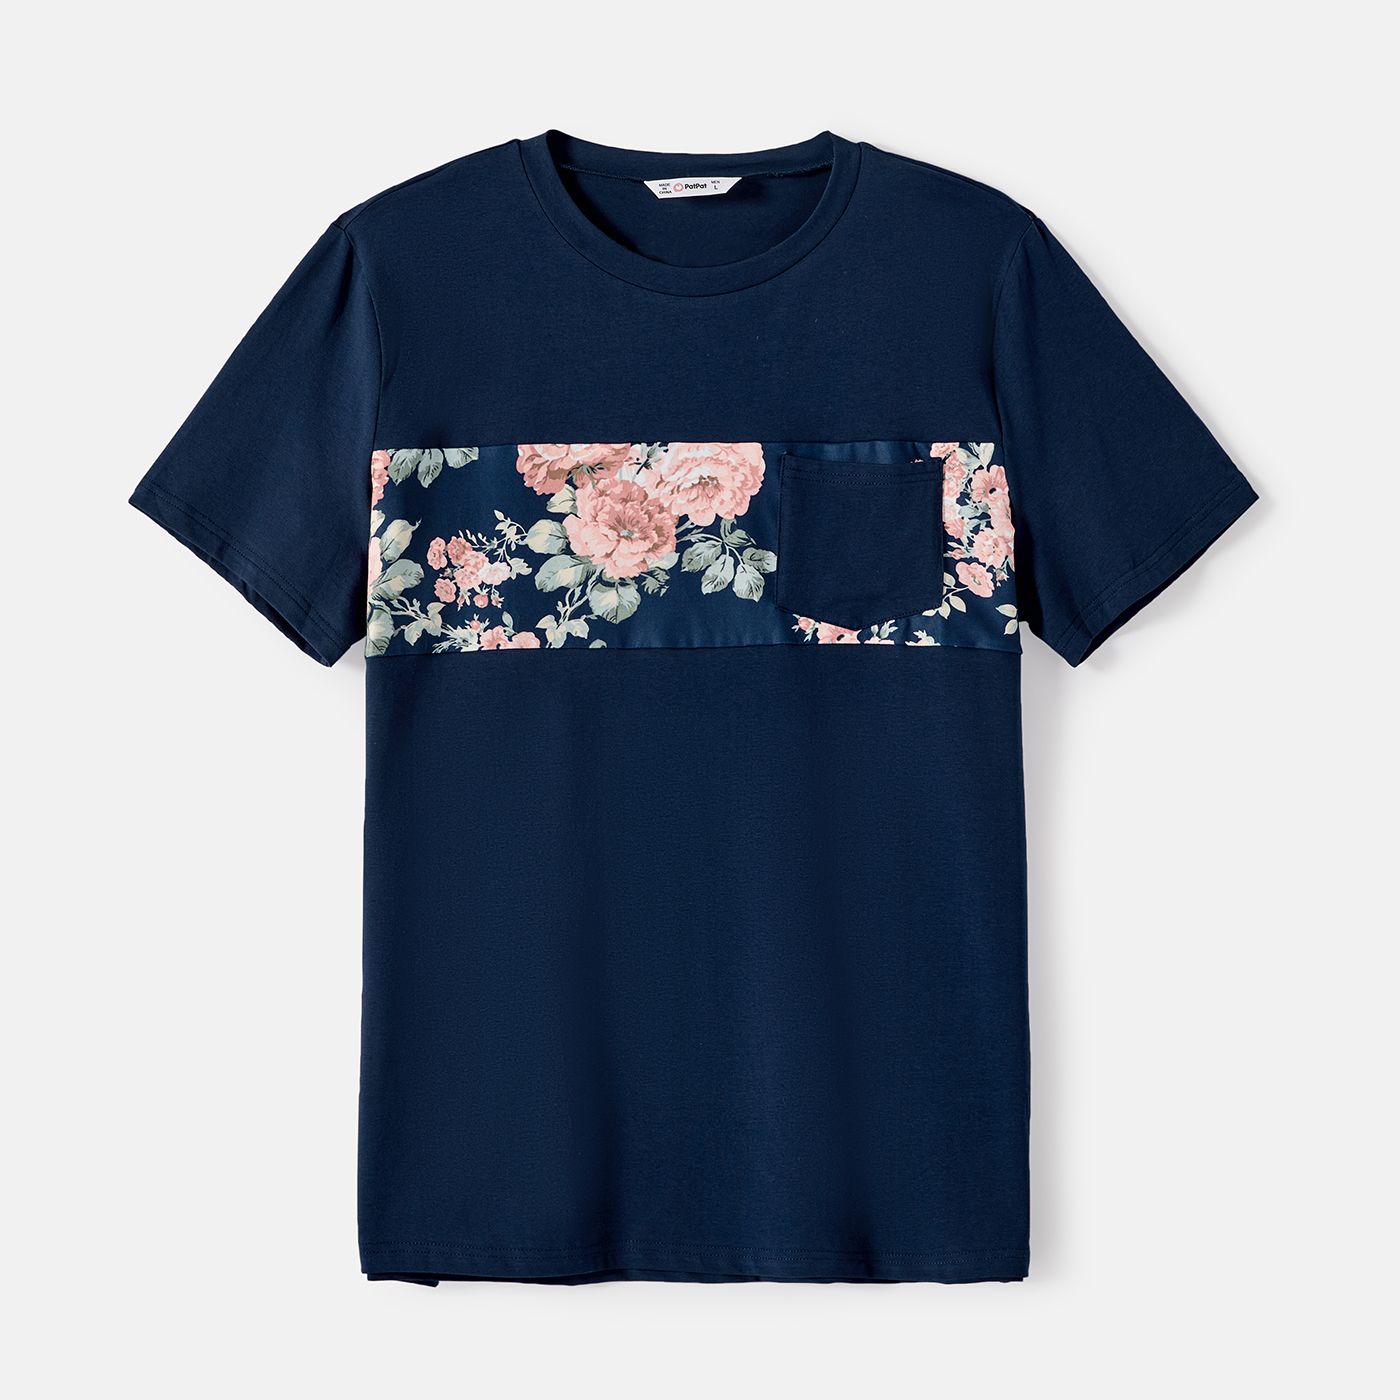 Family Matching Cotton Short-sleeve Spliced Tee and Allover Floral Print Flutter-sleeve Belted Dress